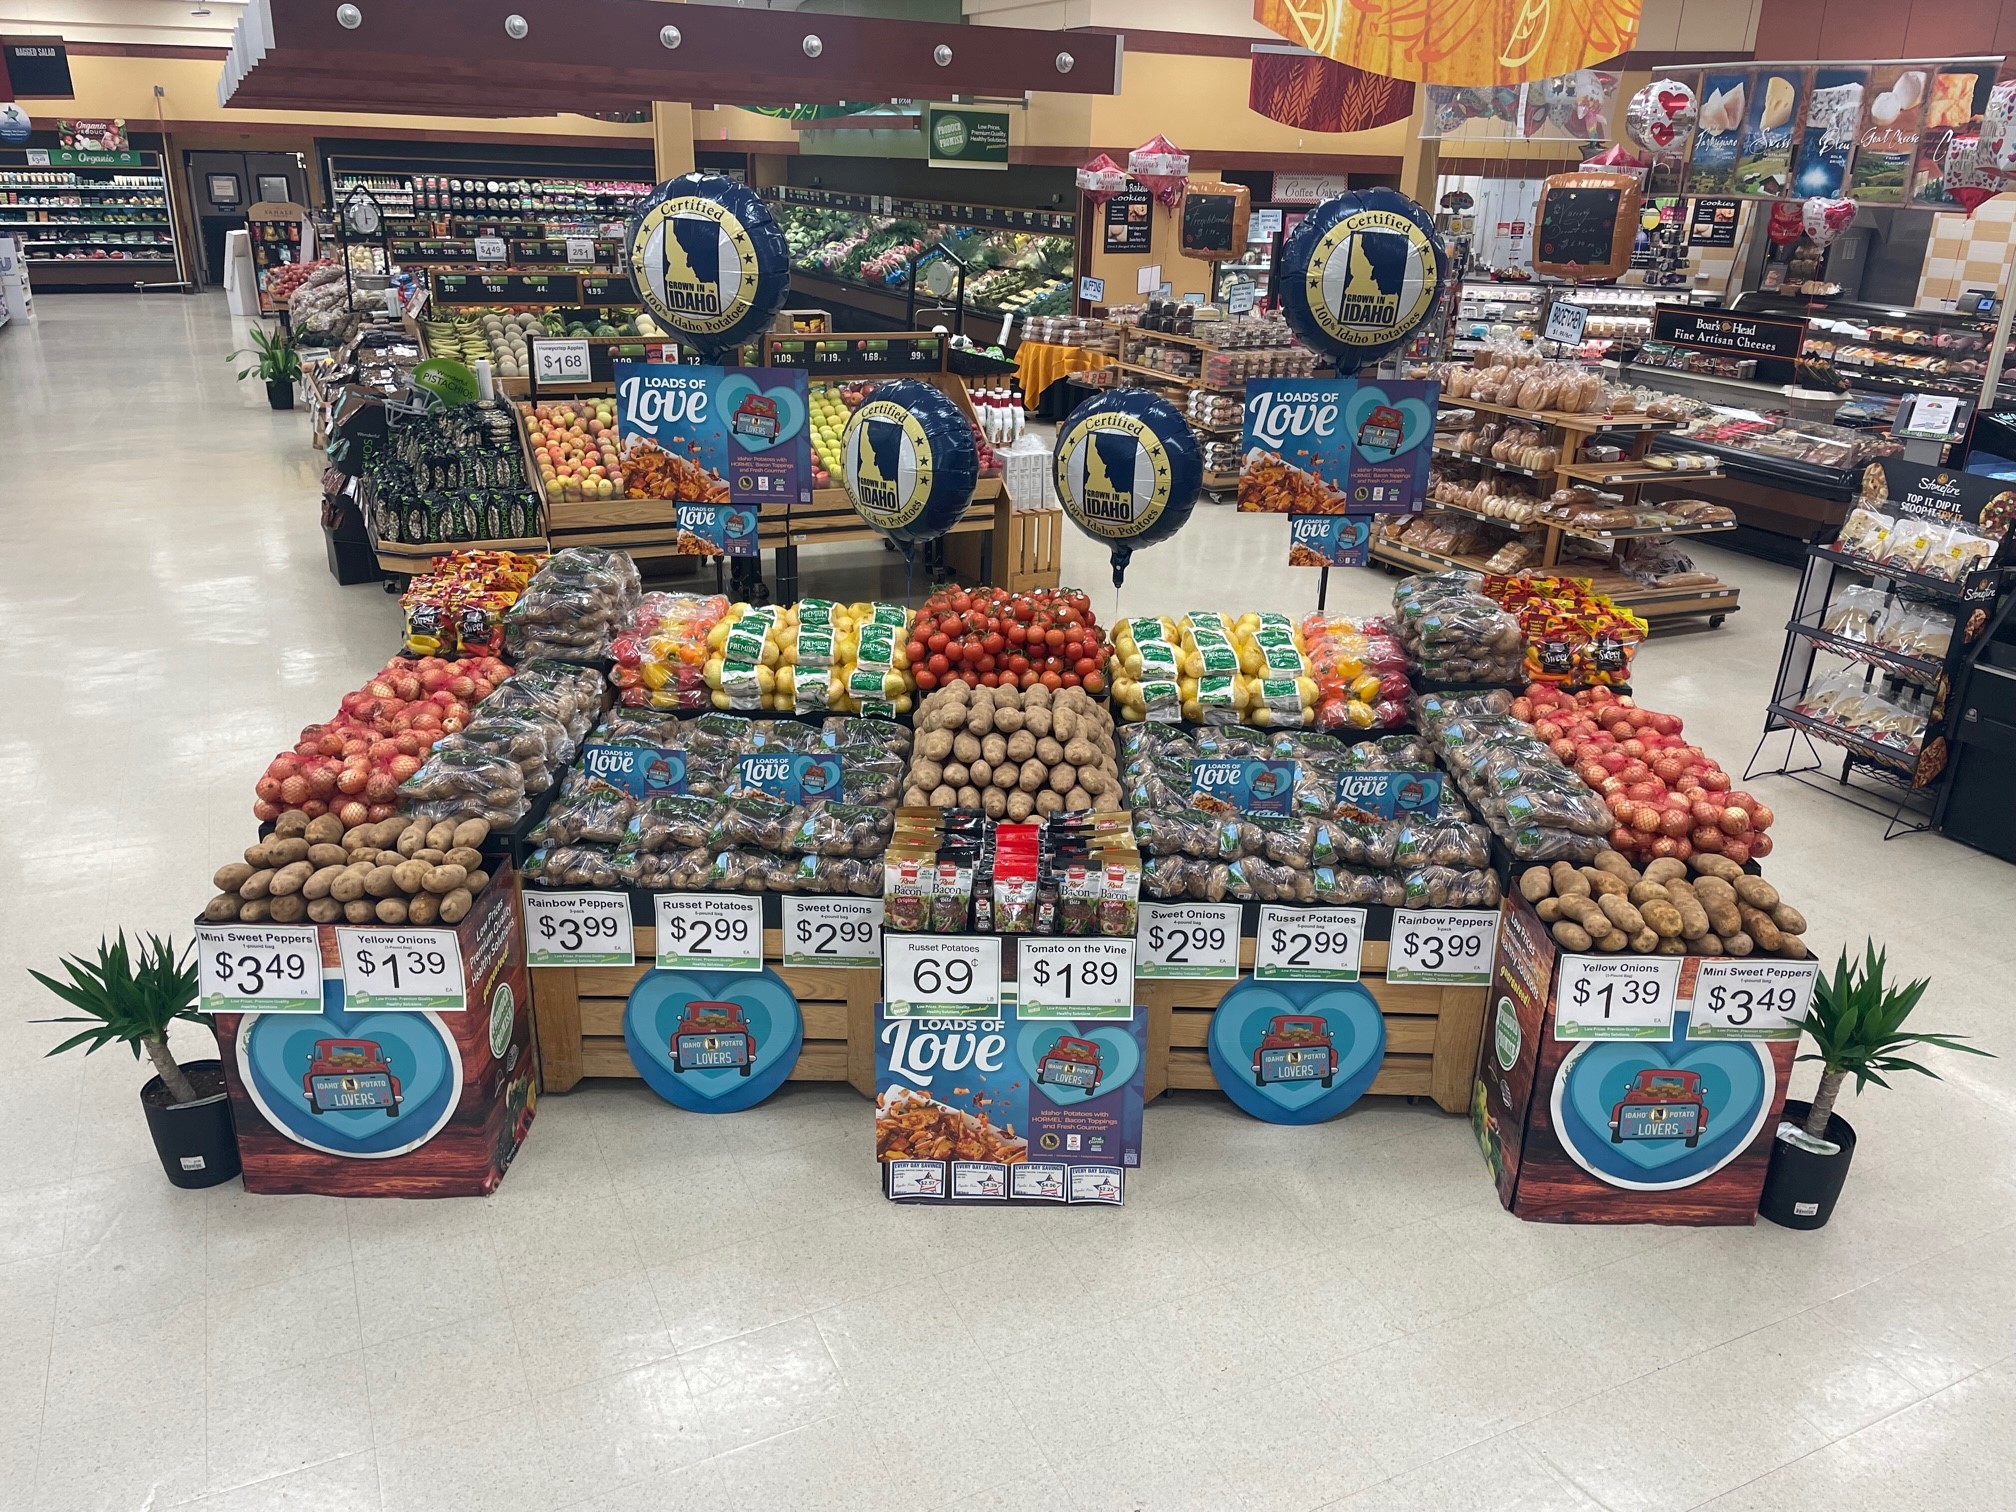  Best Potato Display winner: A tie between Stephen Daly of Military Produce Group’s Fort Eustis and Fort Lee locations.